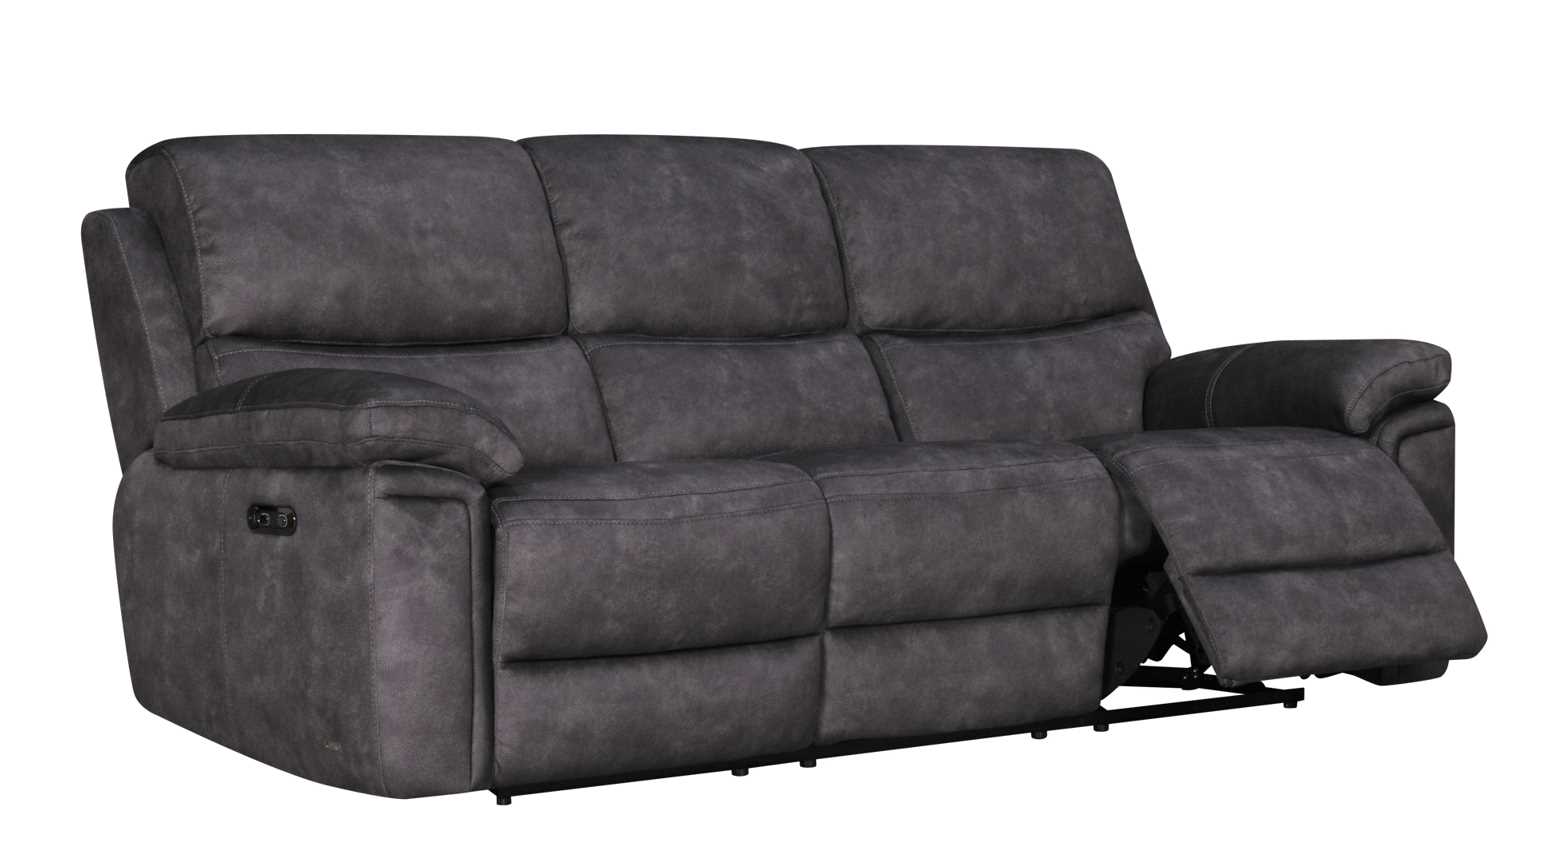 Reclining Elegance Exploring the Comfort of Chesterfield Sofas with Recline Features  %Post Title